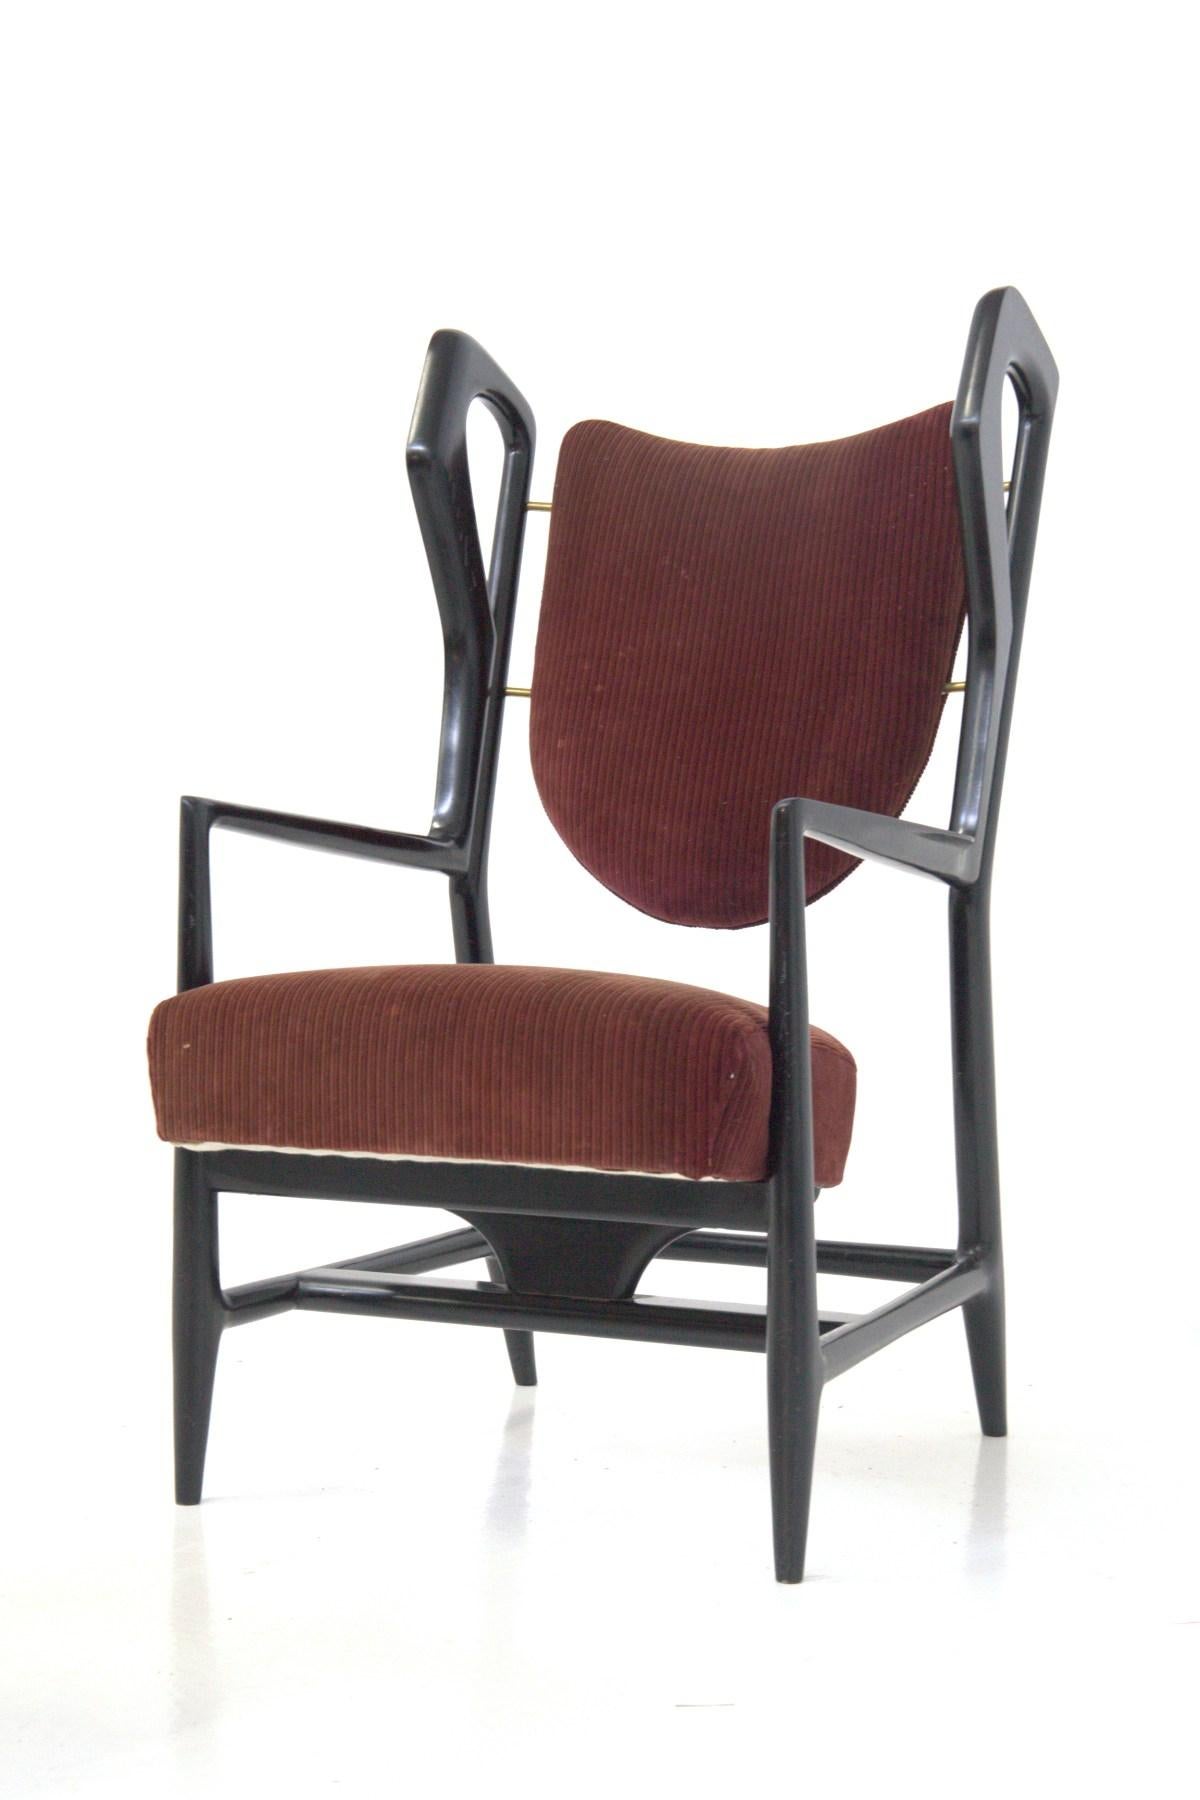 This rare and magnificent pair of chairs, also known as the 